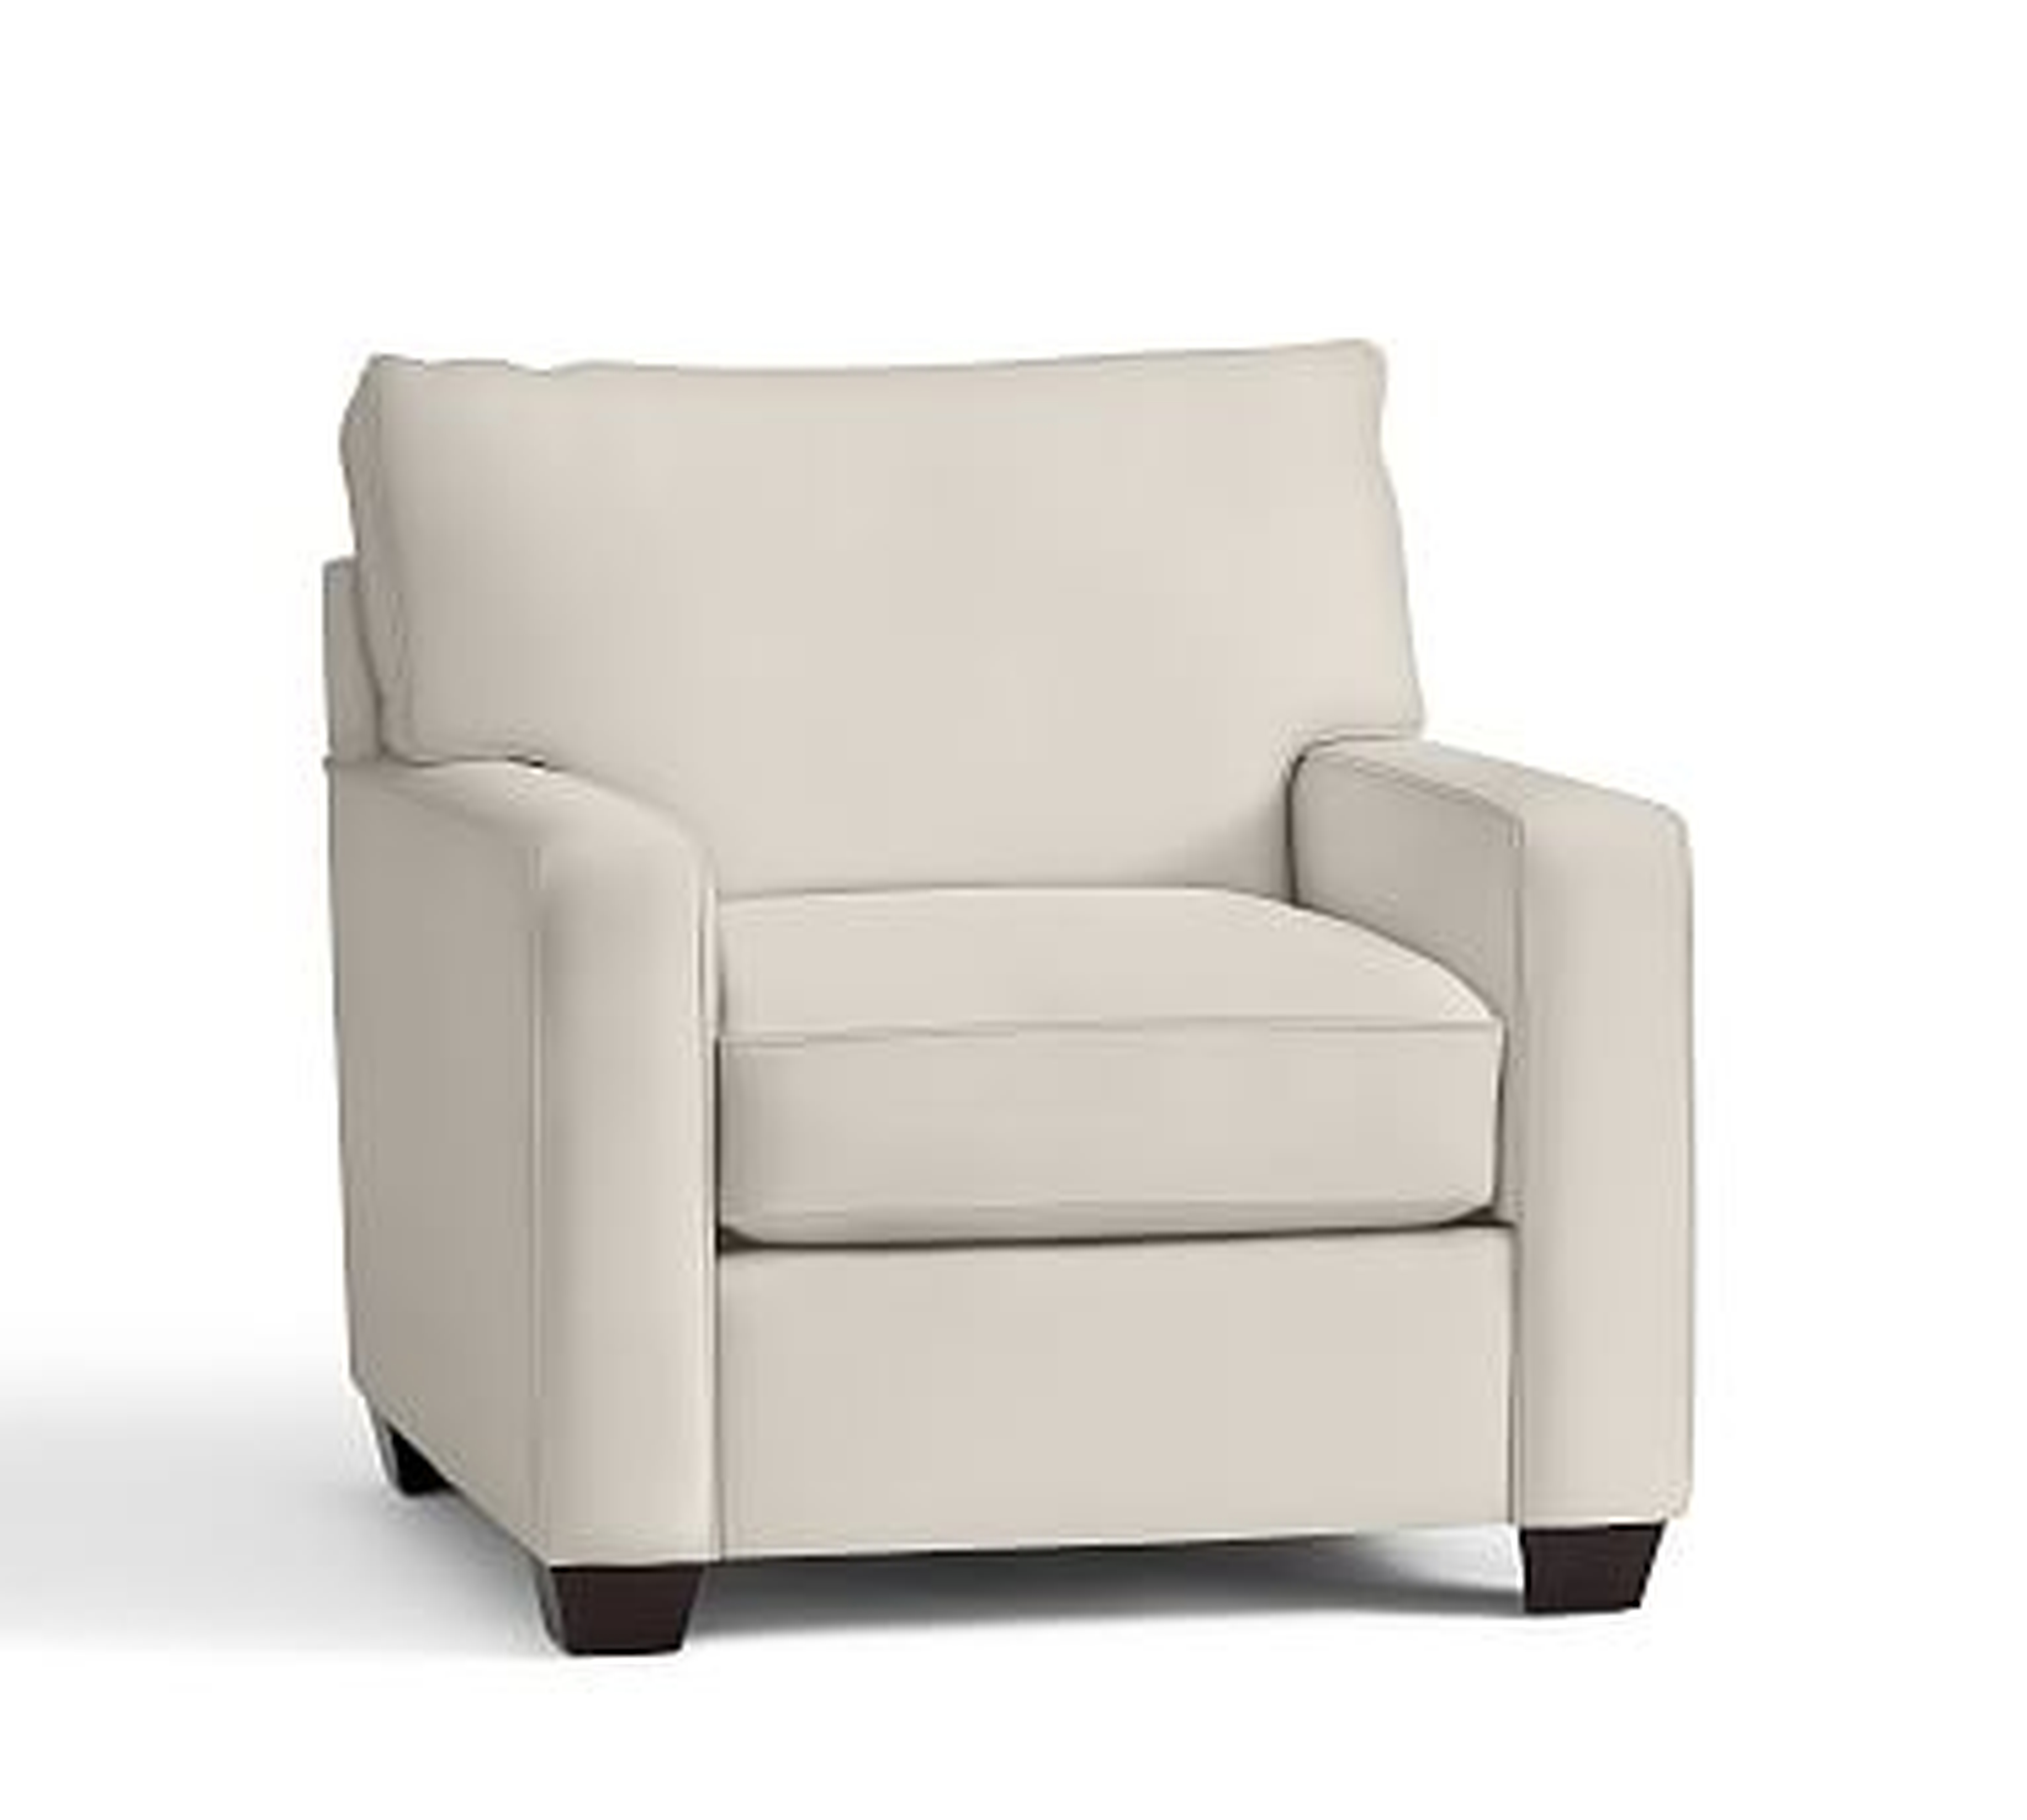 Buchanan Square Arm Upholstered Armchair, Polyester Wrapped Cushions, Twill Cream - Pottery Barn